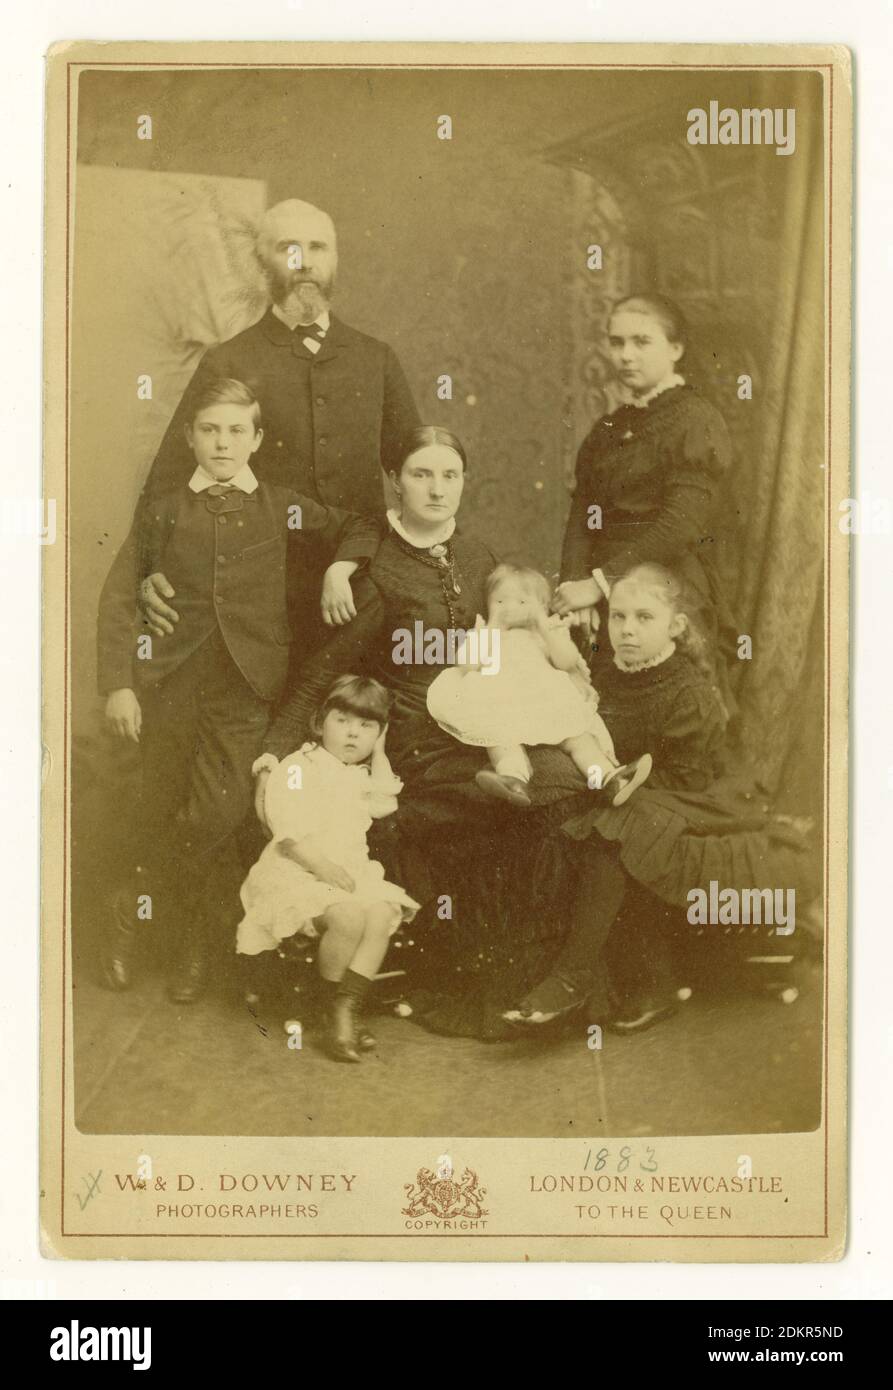 Original Victorian CDV (Carte de Visite or visiting card) of a Victorian family of 5 children, including a baby. From the studio of W. & D. Downey, (photographers to the Queen) based at London and Newcastle, dated 1883 on the front. Stock Photo